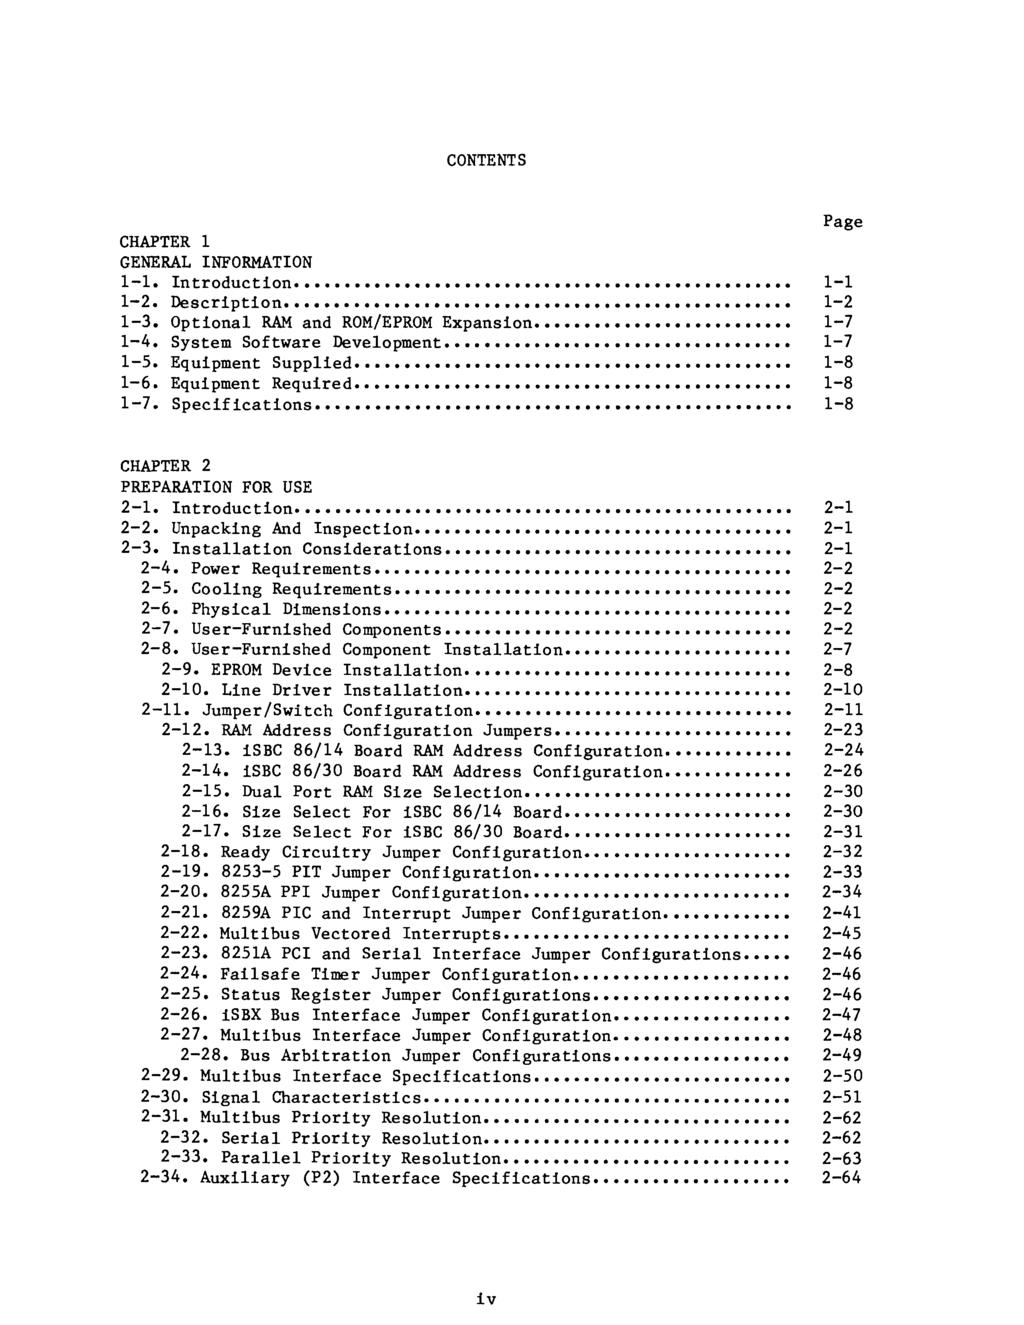 CONTENTS CHAPTER 1 GENERAL NFORMATON 1-1. ntroduction... 1-1 1-2. 'Description... 1-2 1-3. Optional RAM and ROM/EPROM Expansion... 1-7 1-4. System Software Development... 1-7 1-5. Equipment Supplied.